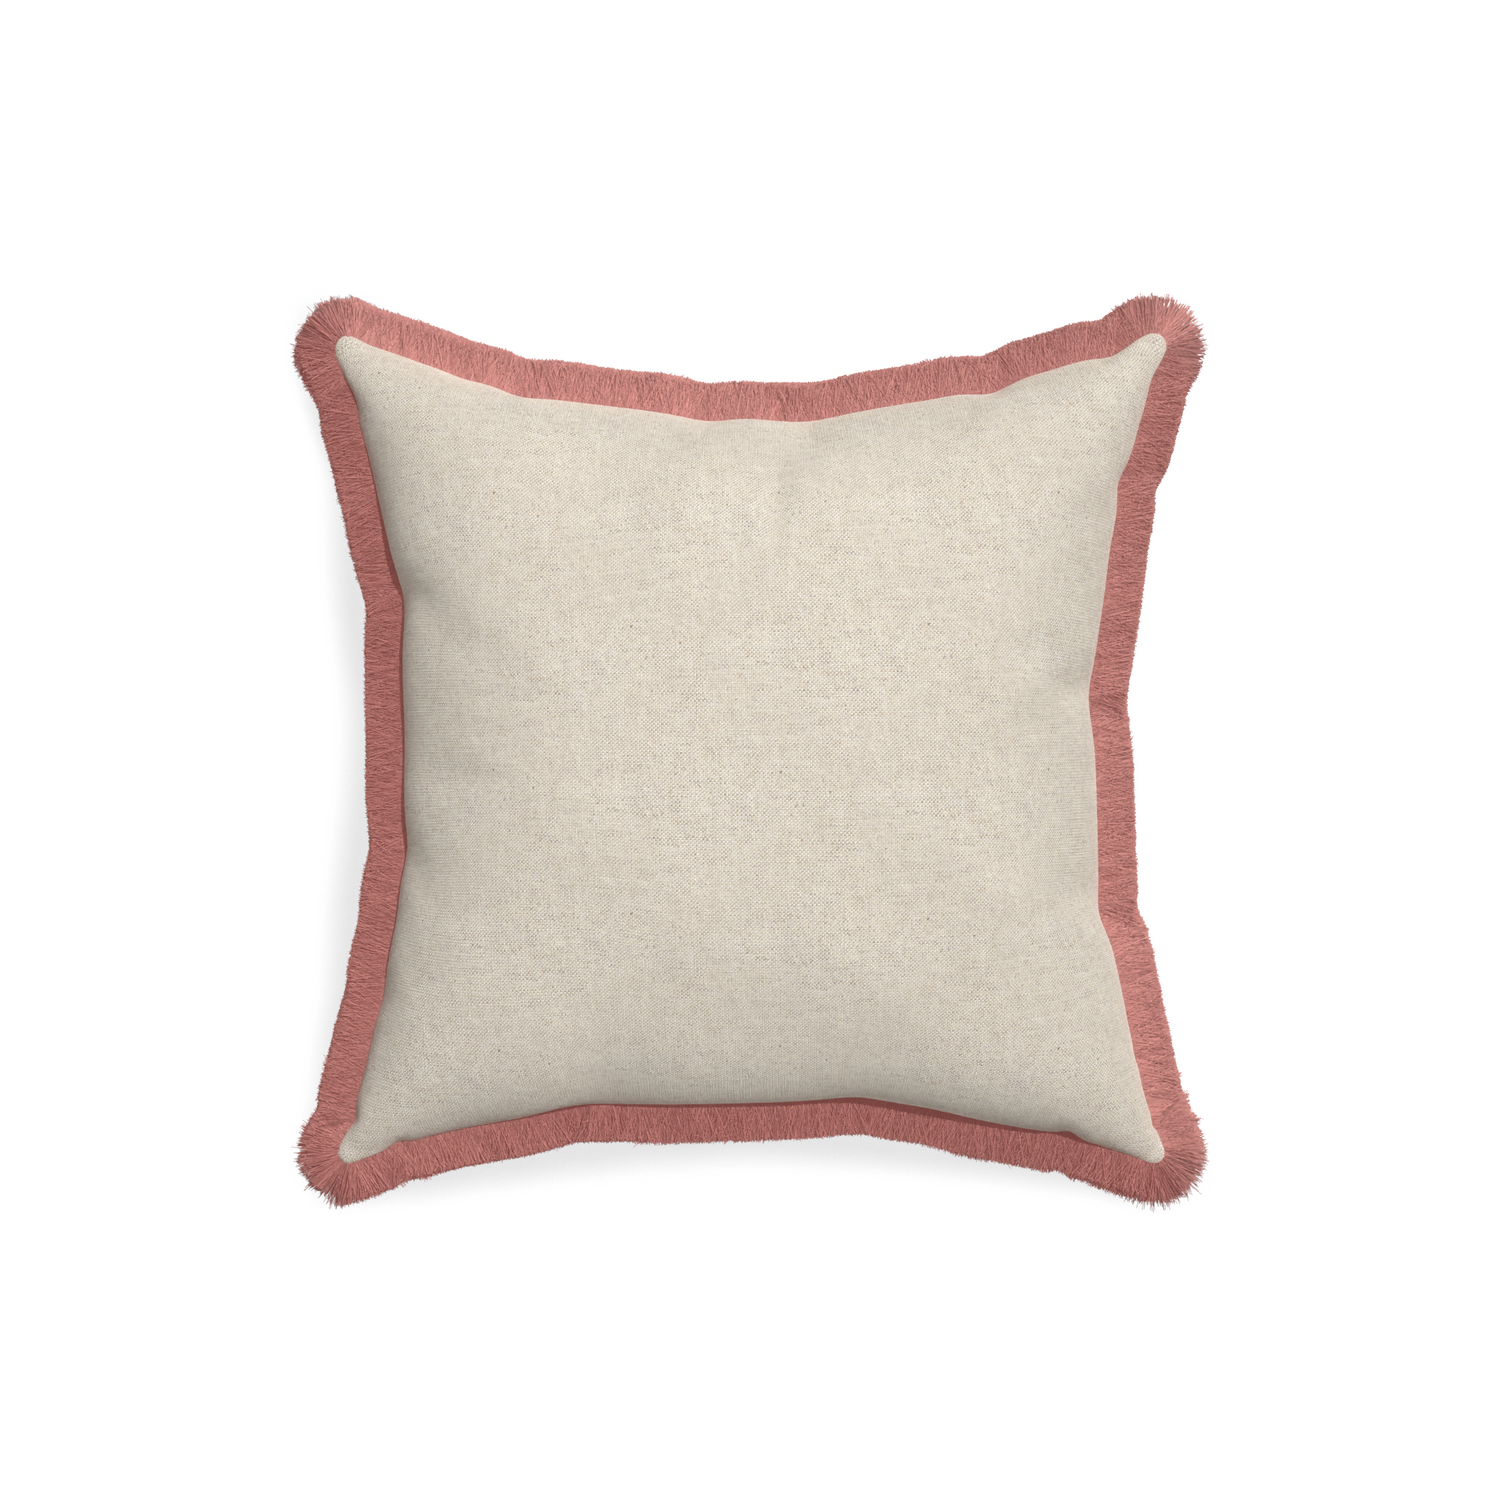 18-square oat custom pillow with d fringe on white background